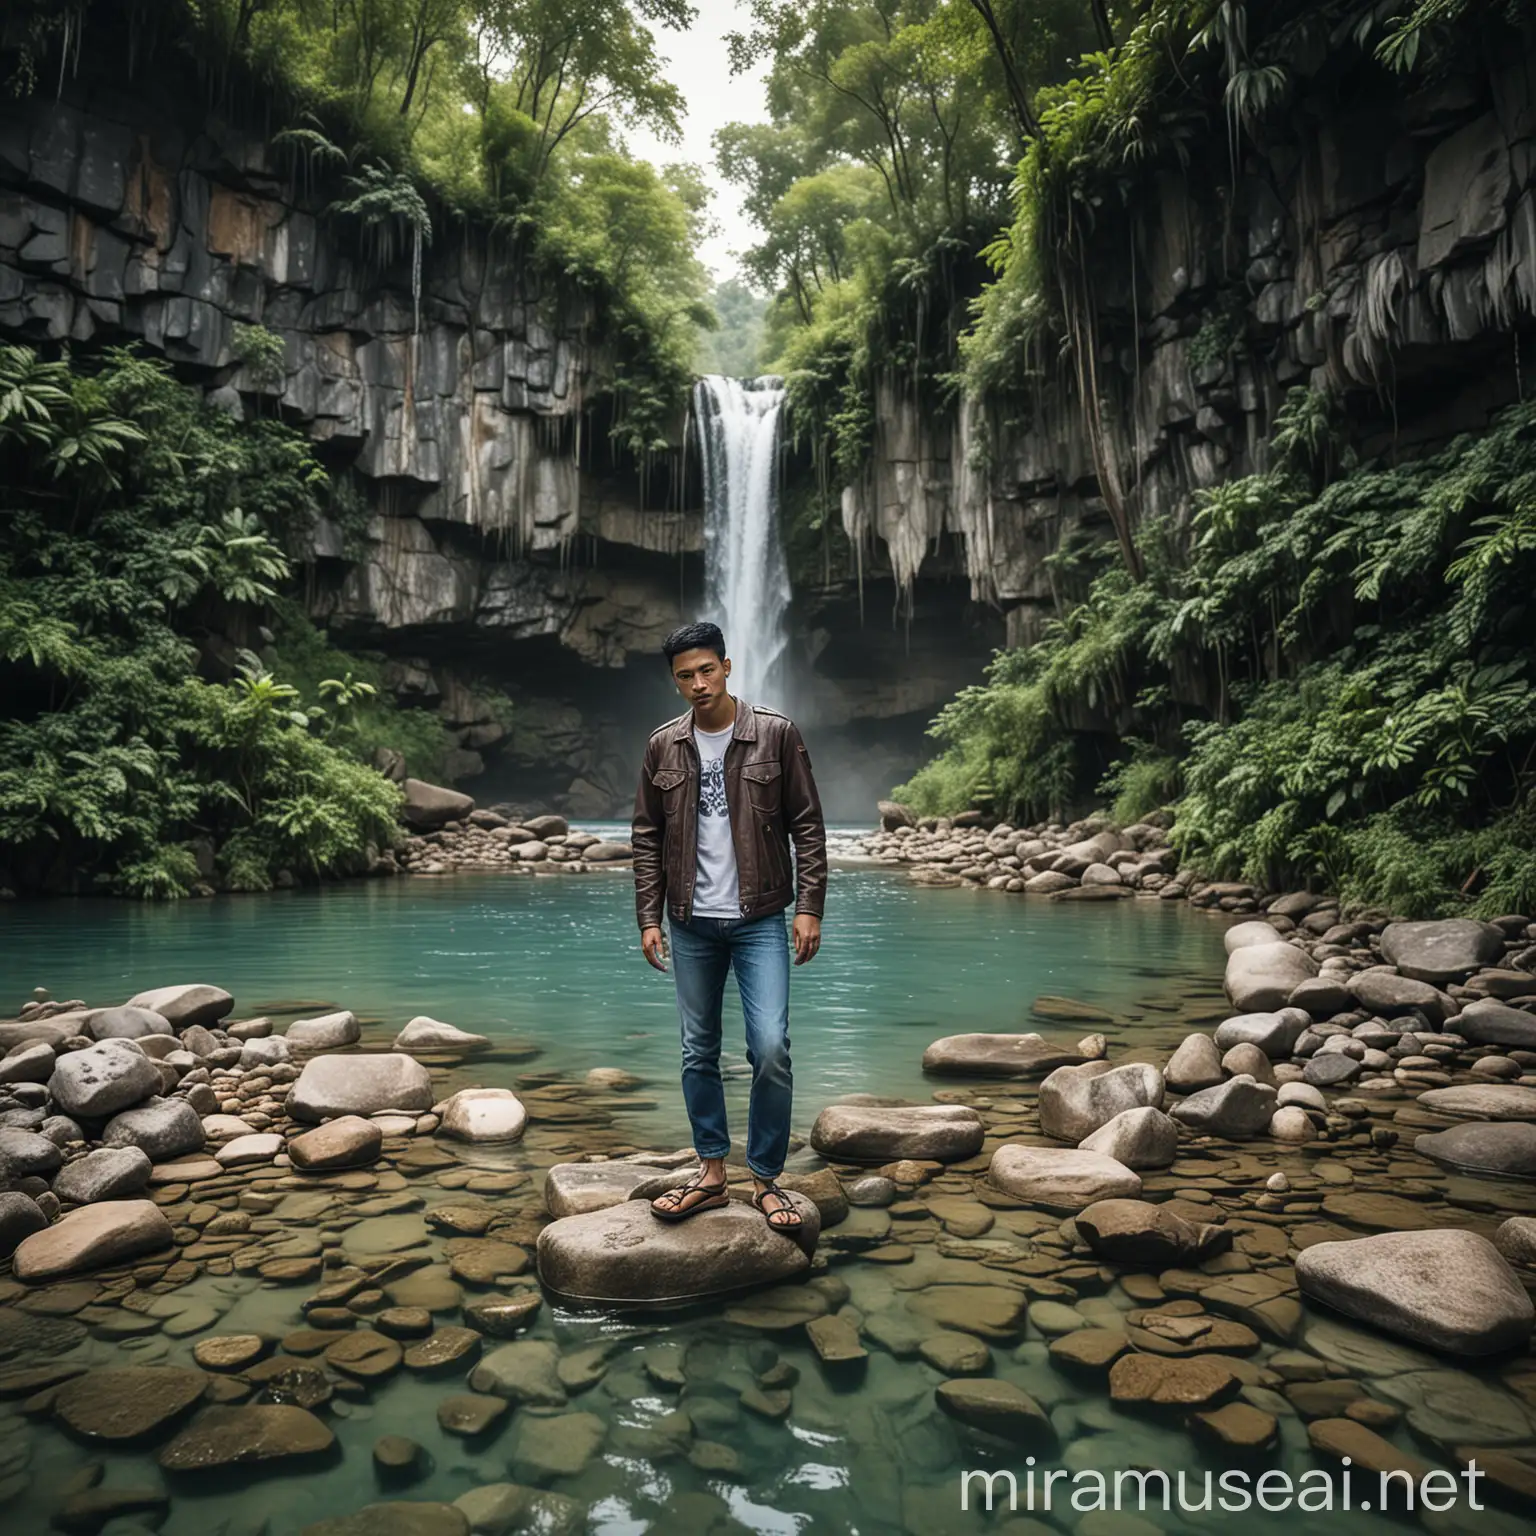 a man from Indonesia, of rather thin build, wearing a leather jacket, blue jeans, and leather sandals, is standing on rocks by a shallow river with very clear water. The background of the river is also very clear. There is a beautiful waterfall amidst the lush greenery.